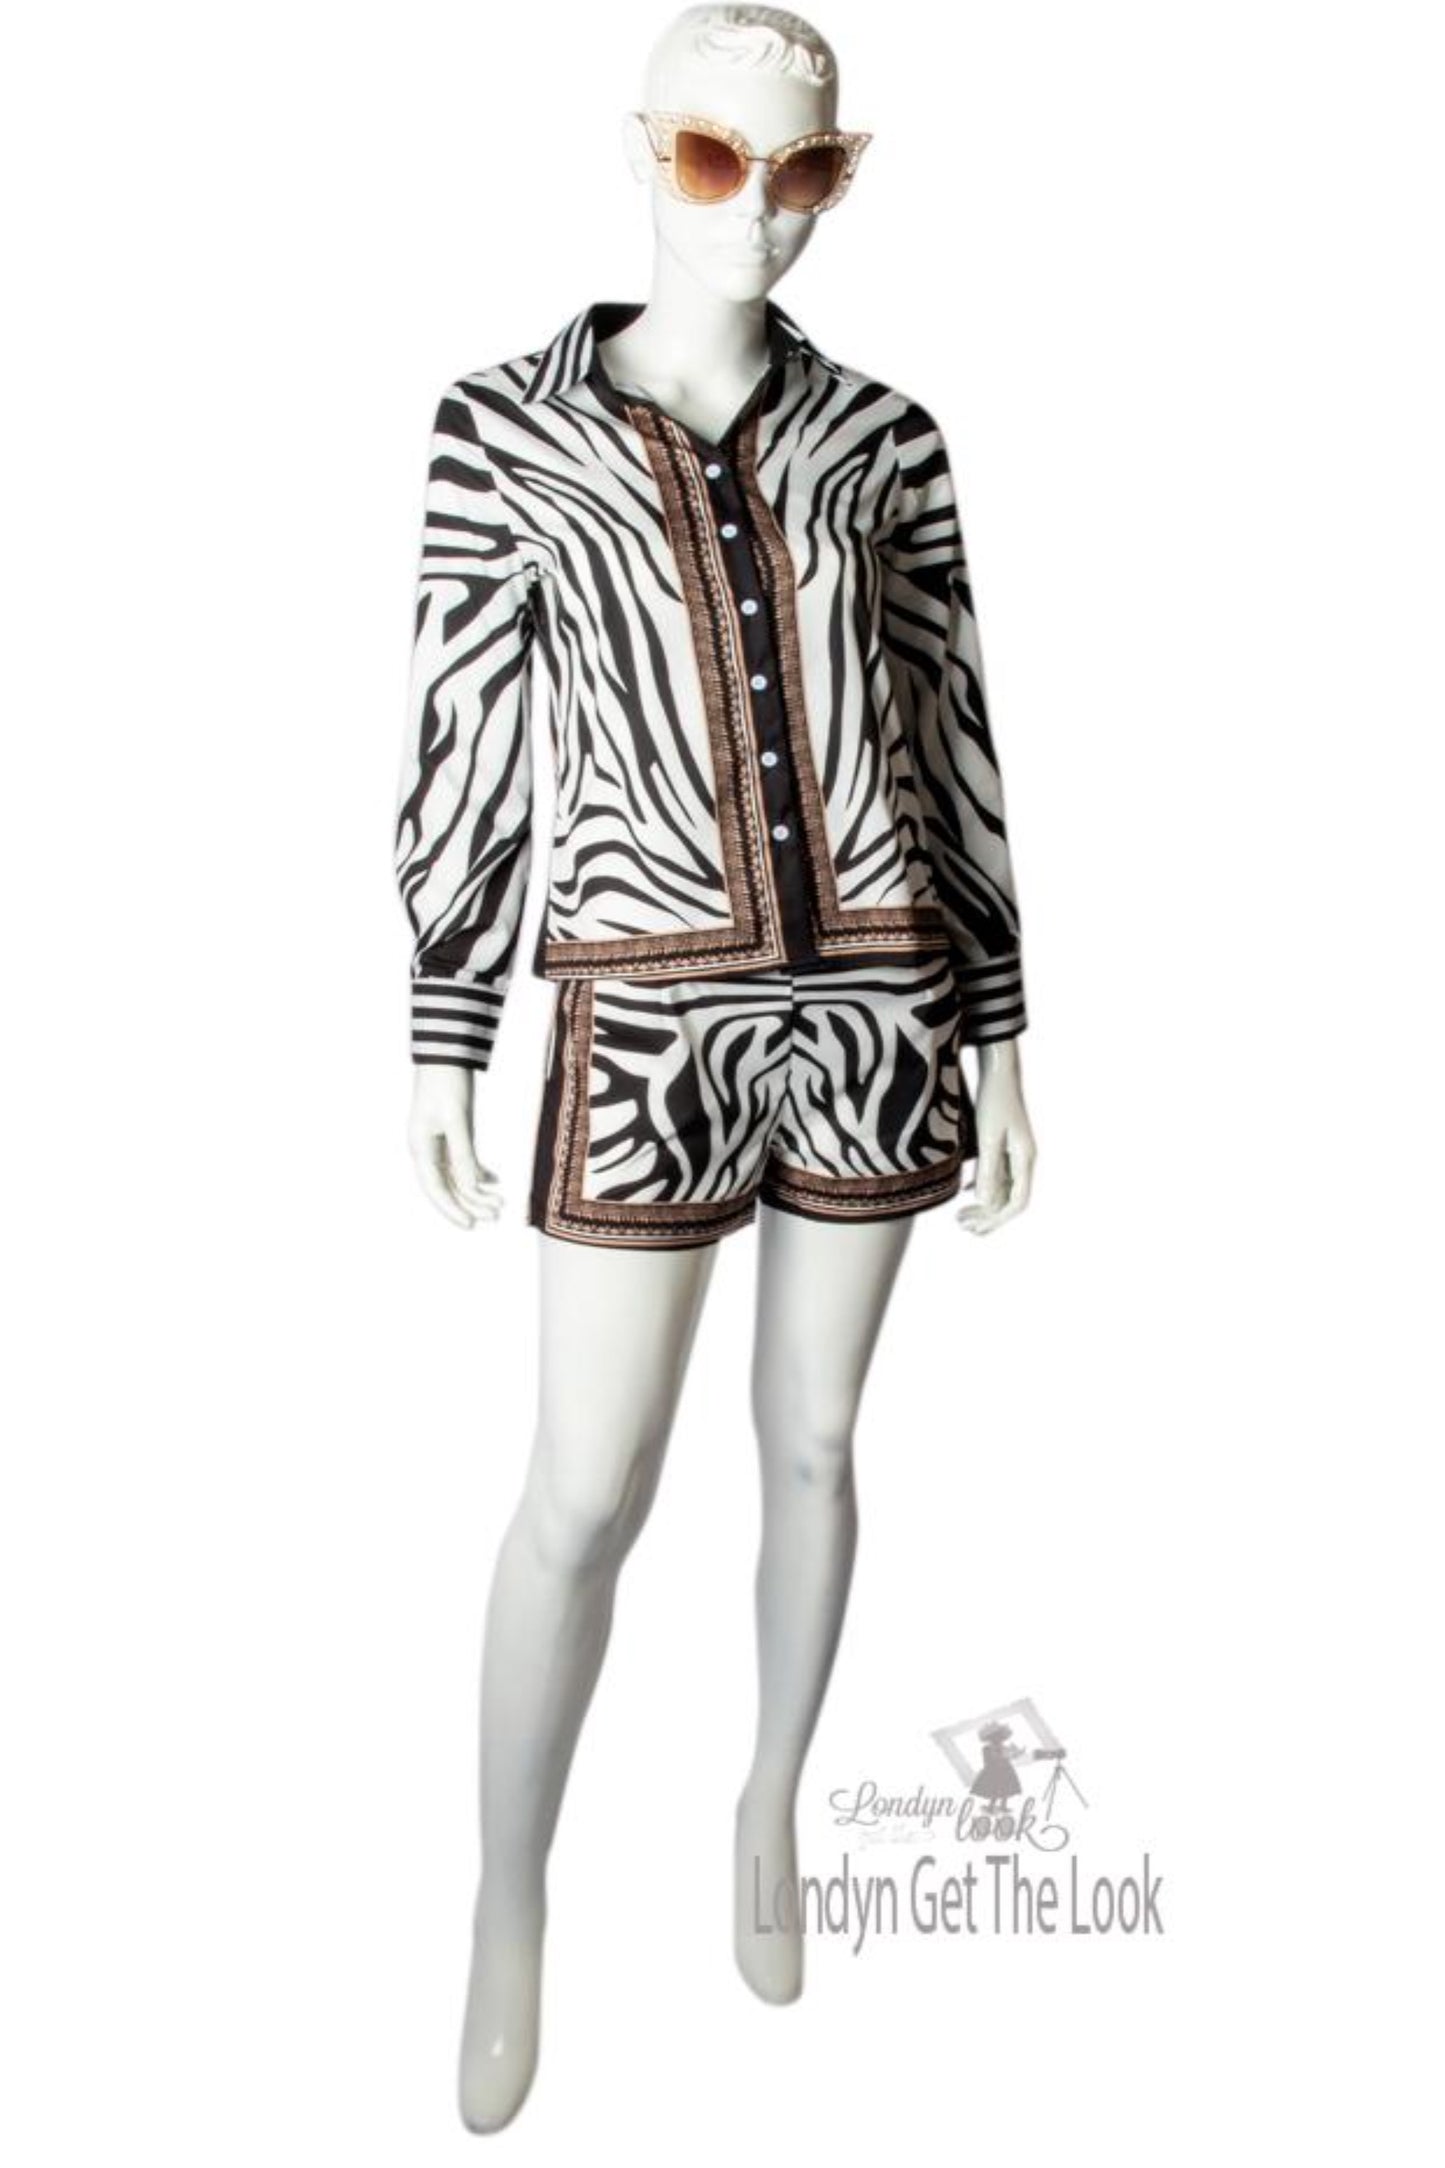 Zebra Print Buttoned Shirt & Zipper Short Sets long sleeve with brown/gold border v-neck turn-down collar paired with a matching shorts Very chic and sexy above knee mini shorts and side pocket 